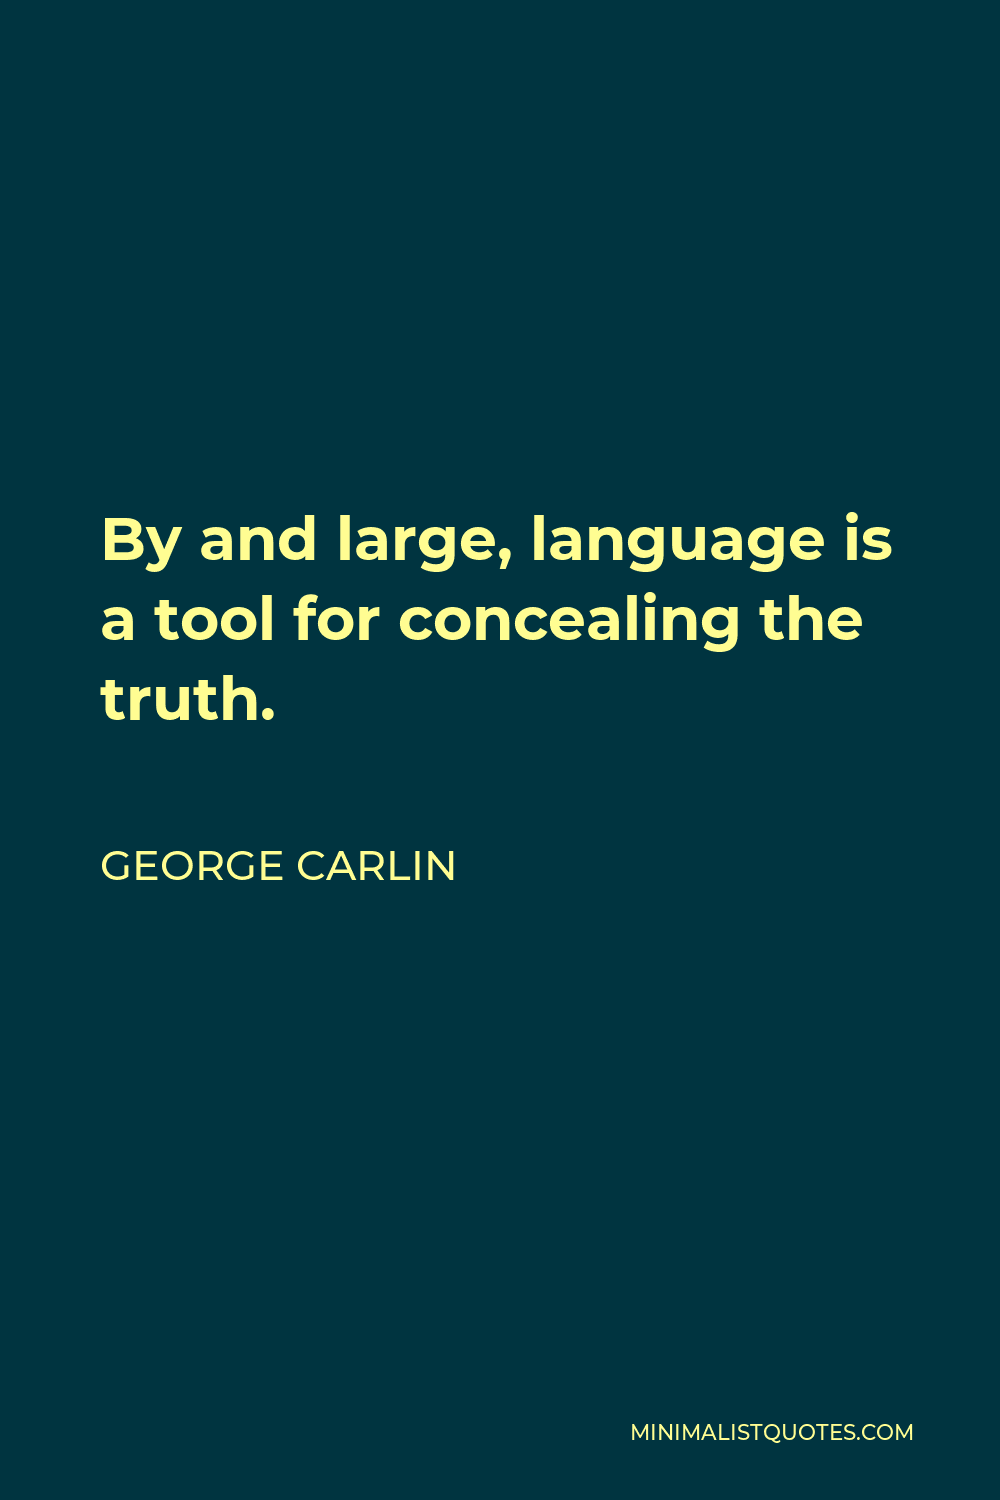 George Carlin Quote - By and large, language is a tool for concealing the truth.